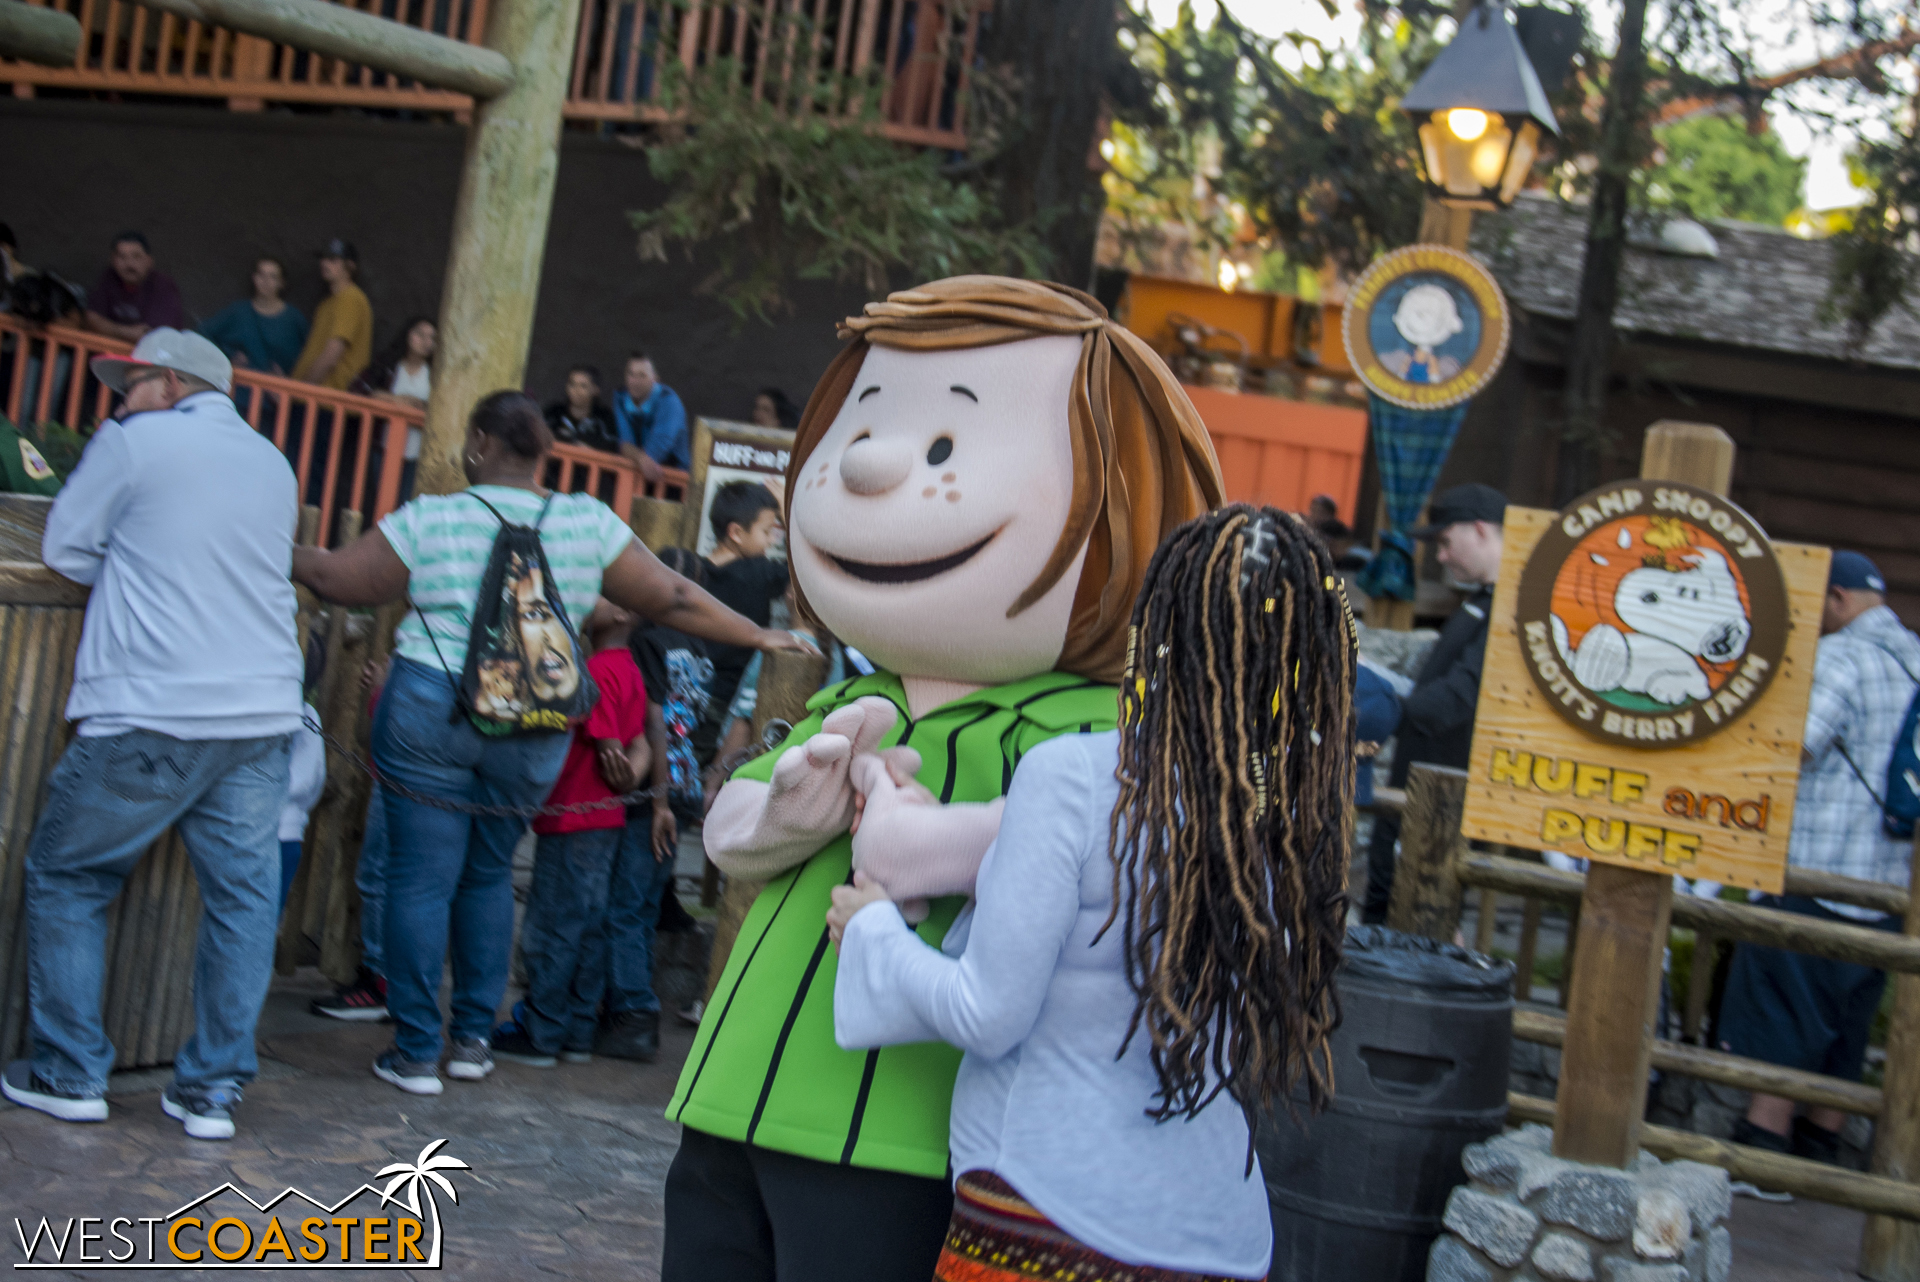  Guests can meet an assortment of Peanuts characters, from the popular folks to even secondary characters like Peppermint Patty. 